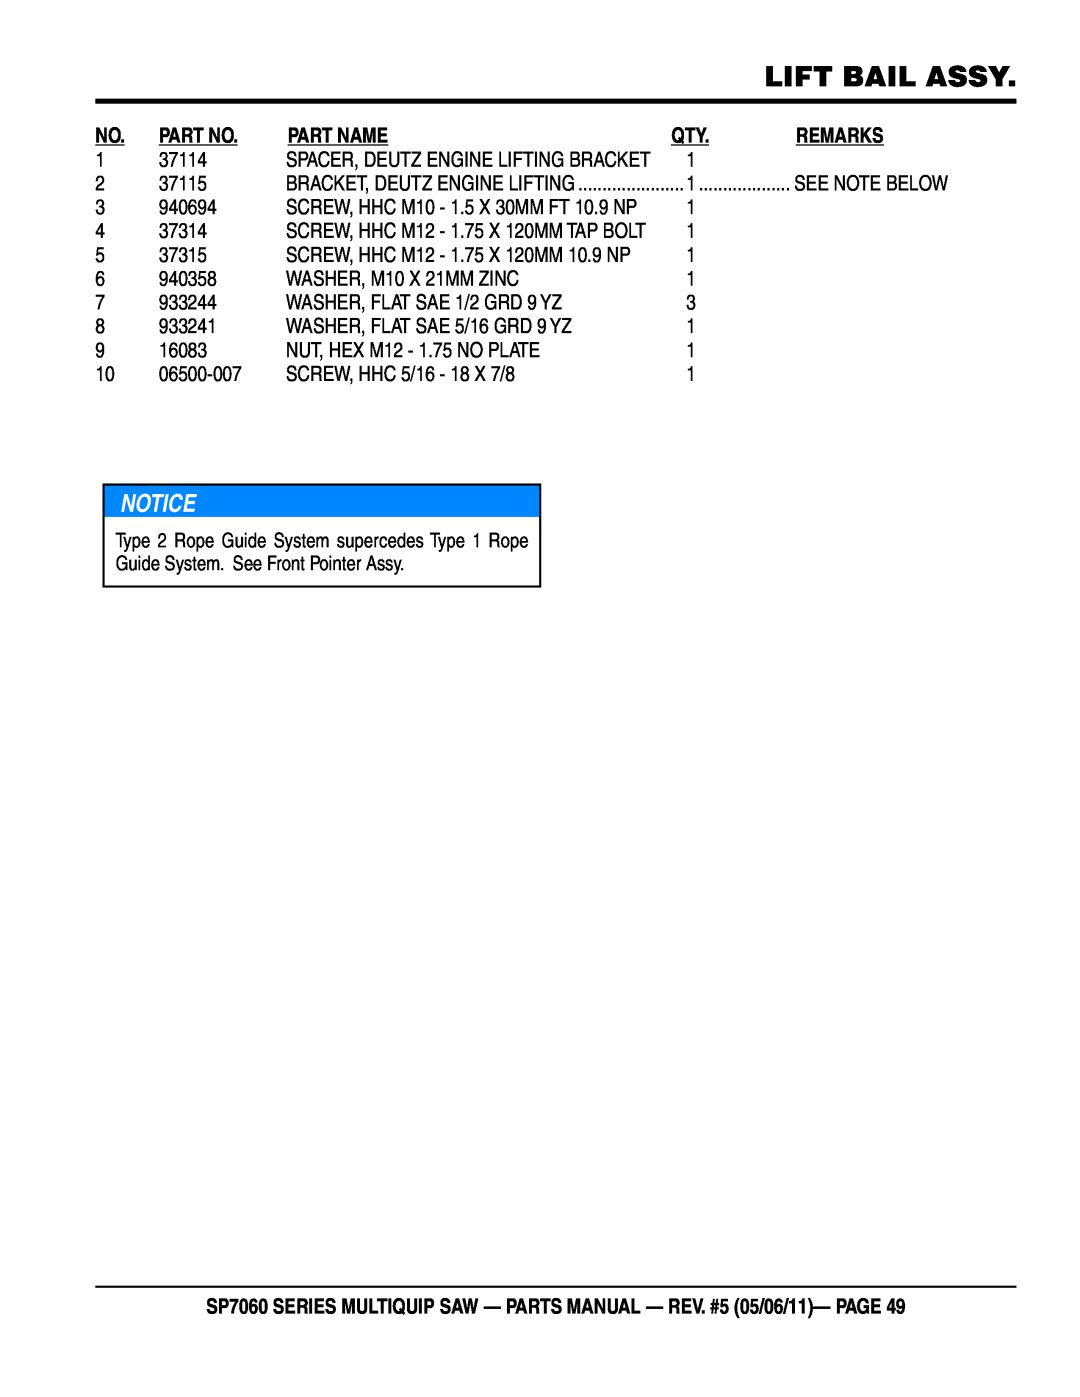 Multiquip SP706012 lift bail assy, Part Name, Remarks, SP7060 SERIES MULTIQUIP SAW - PARTS MANUAL - REV. #5 05/06/11- PAGE 